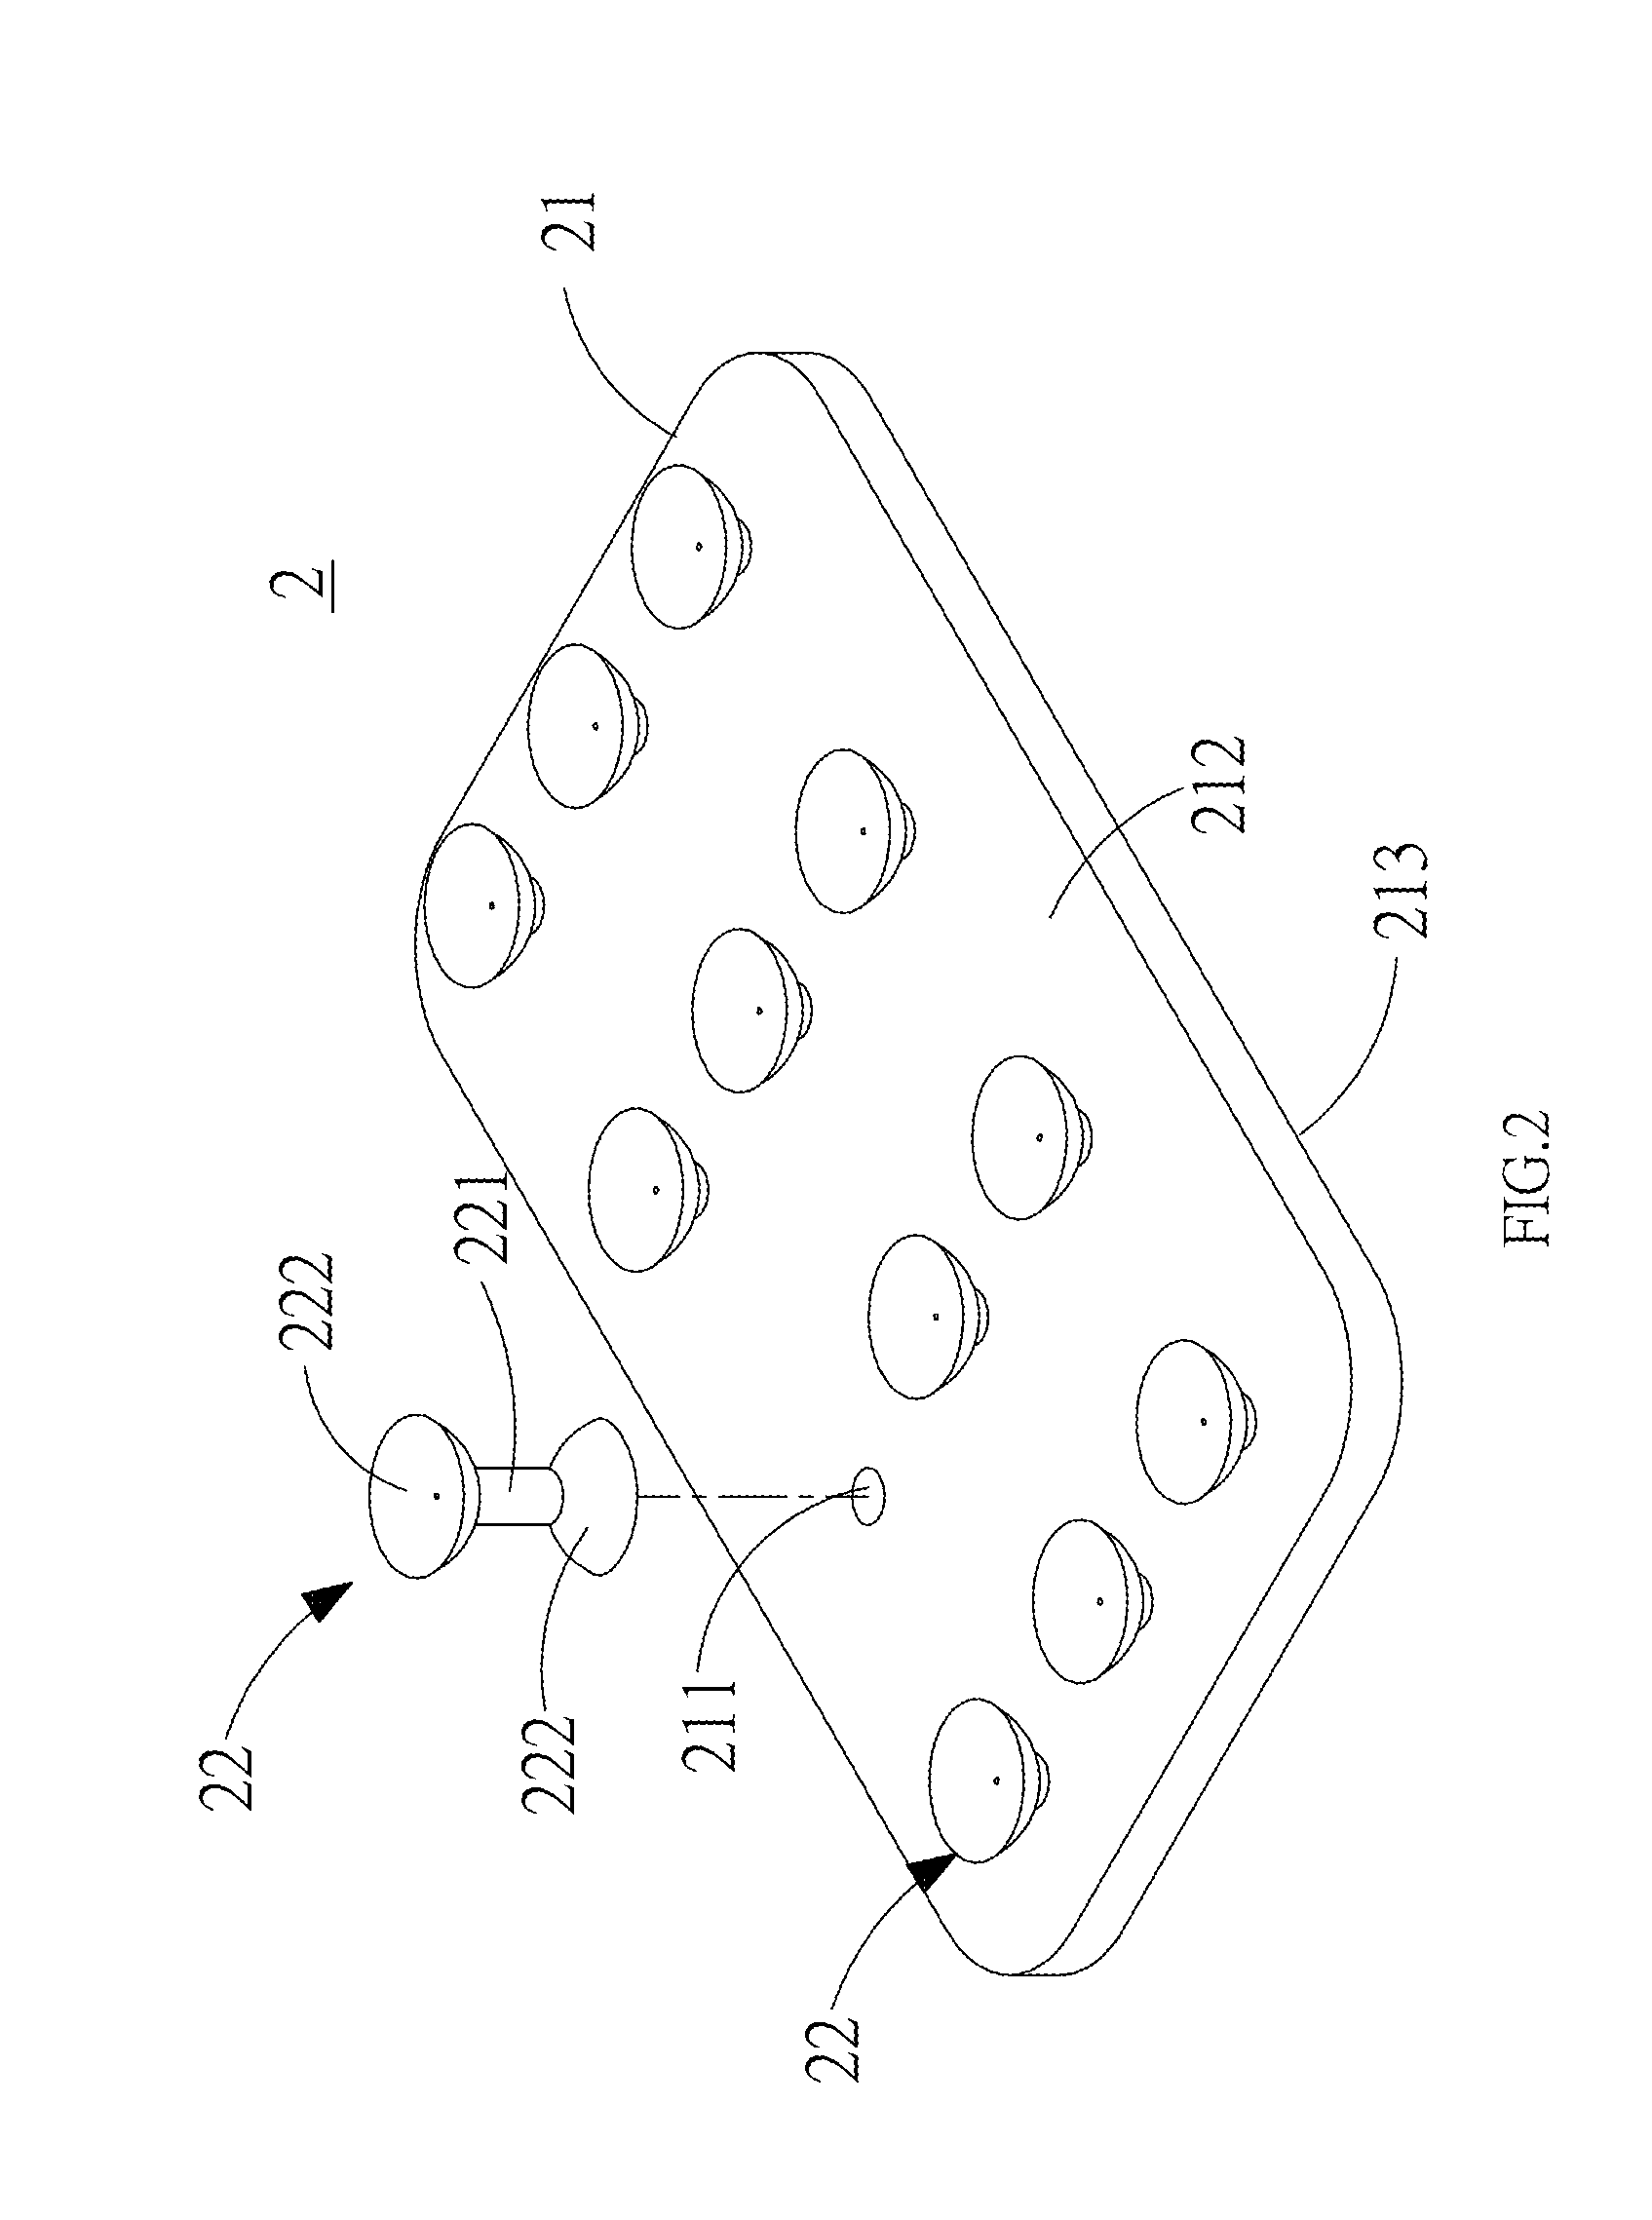 Structure for placing electronic device